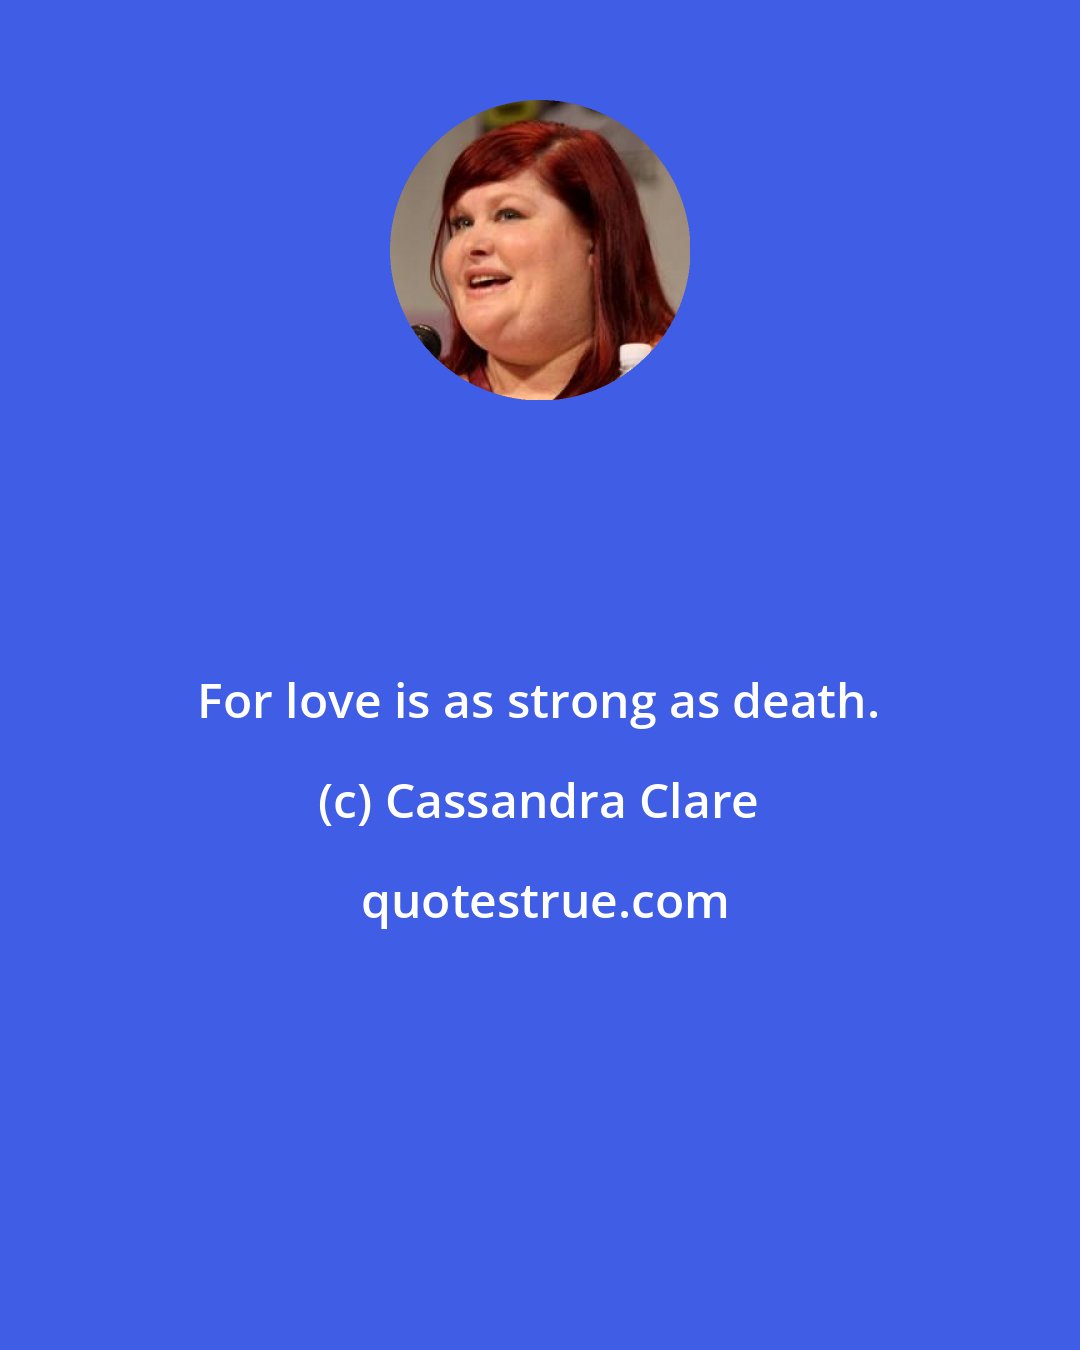 Cassandra Clare: For love is as strong as death.